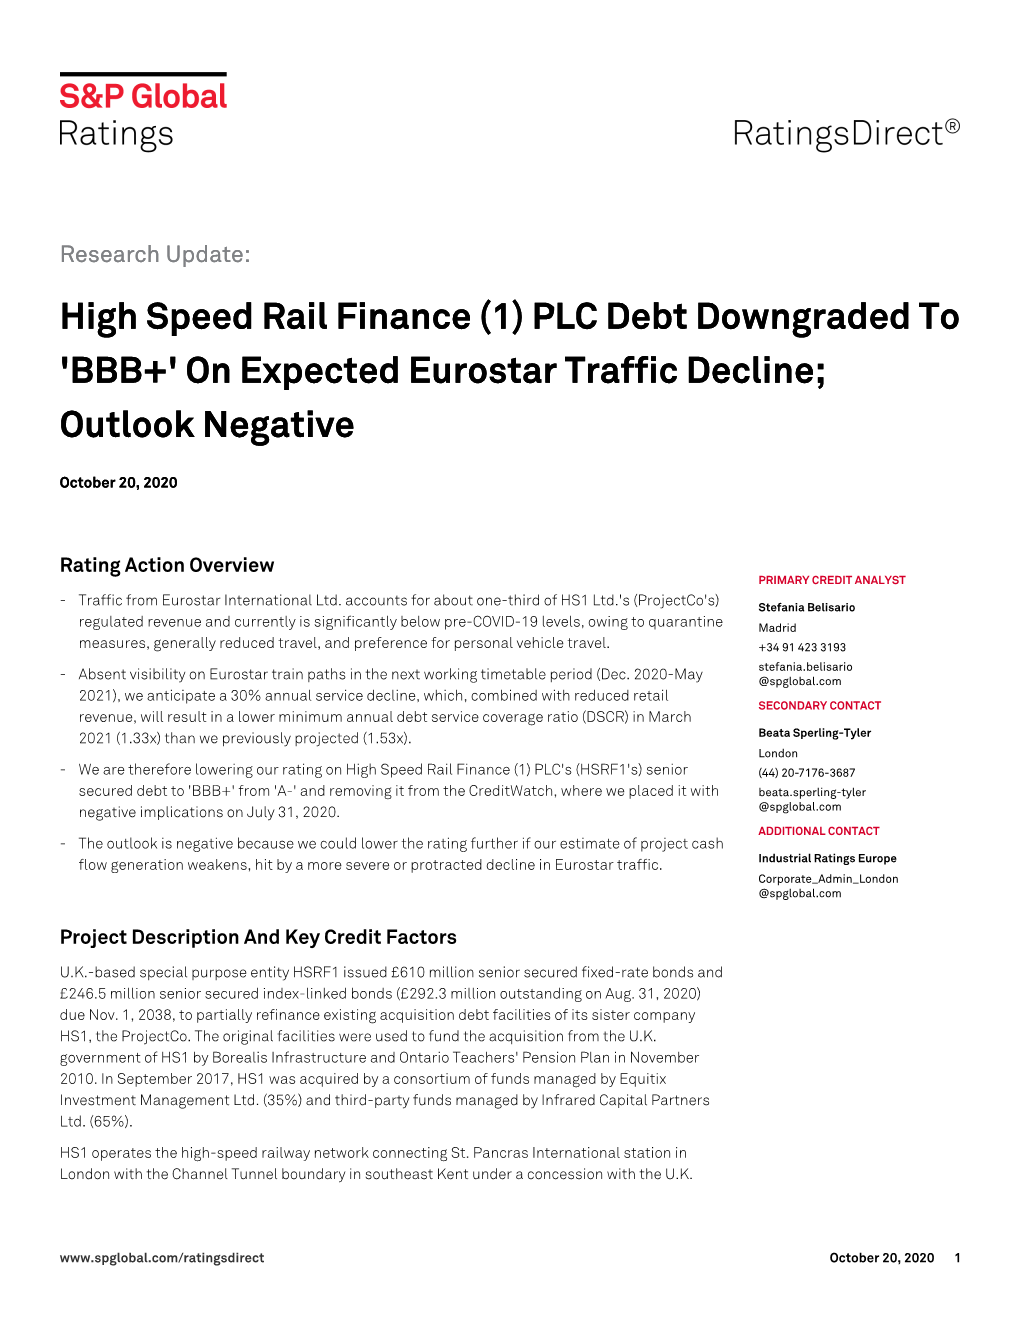 High Speed Rail Finance (1) PLC Debt Downgraded to 'BBB+' on Expected Eurostar Traffic Decline; Outlook Negative